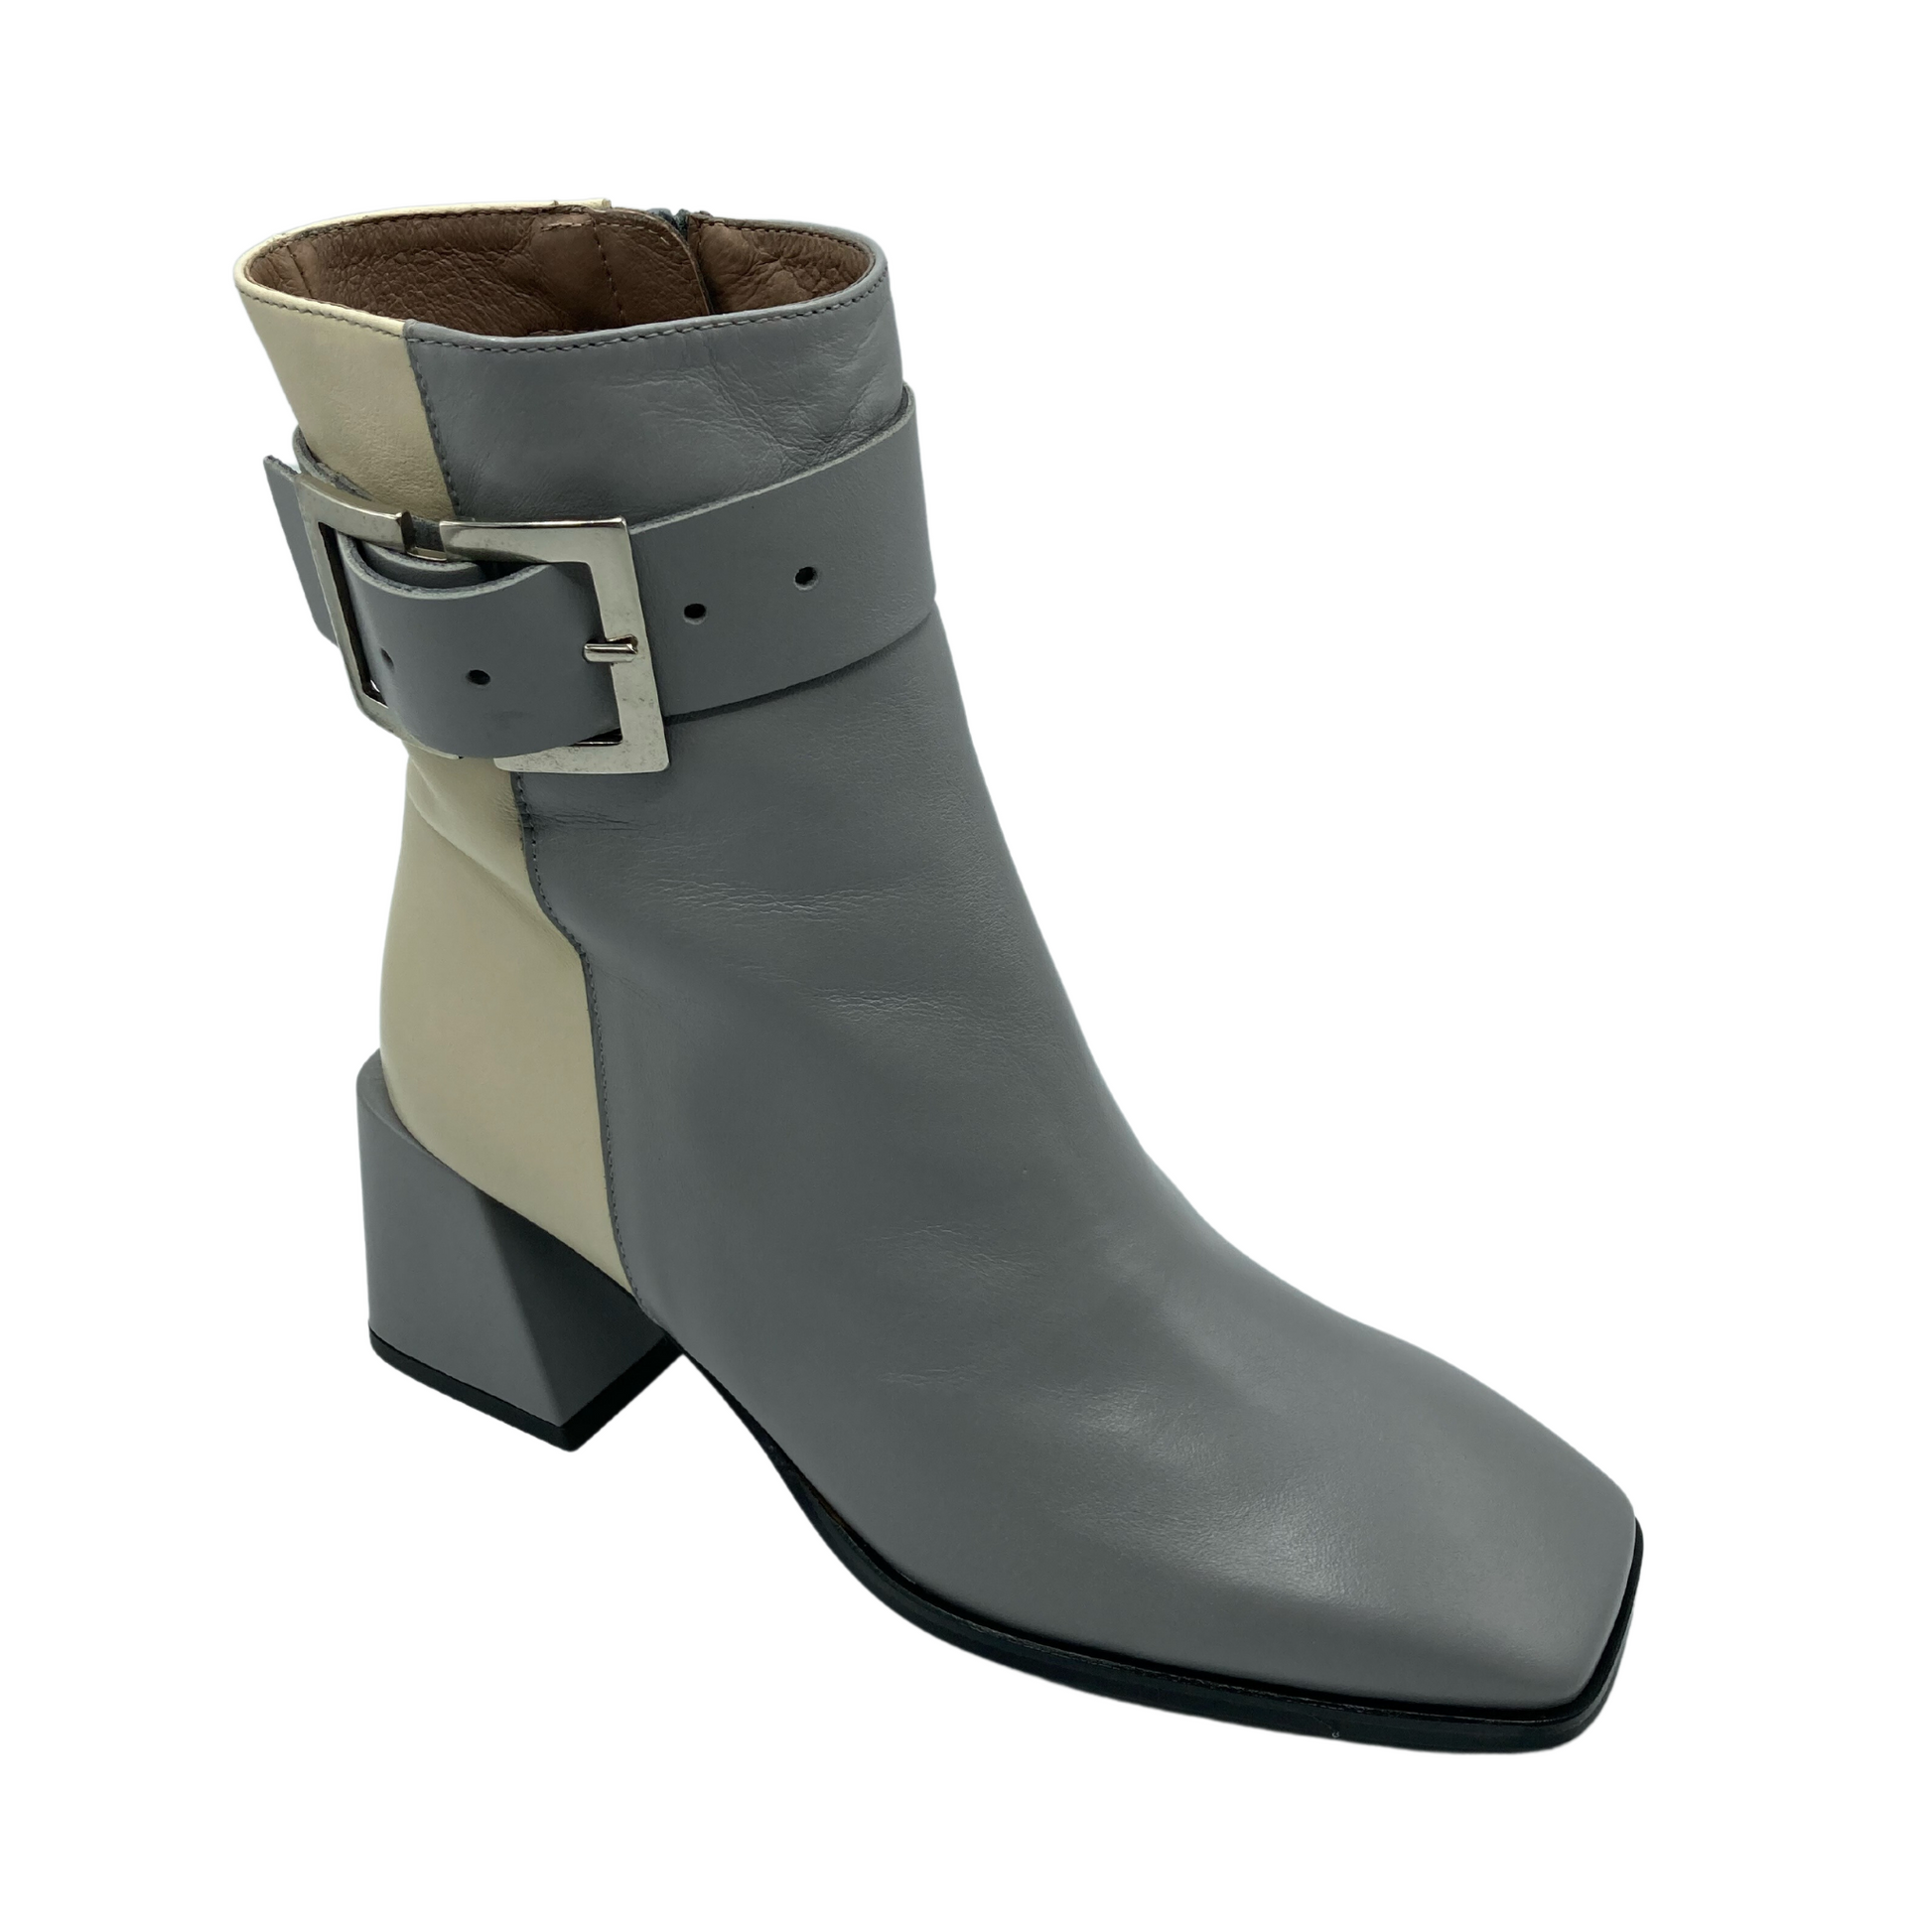 Angled view of grey and cream over the ankle boot with silver buckle on  the side